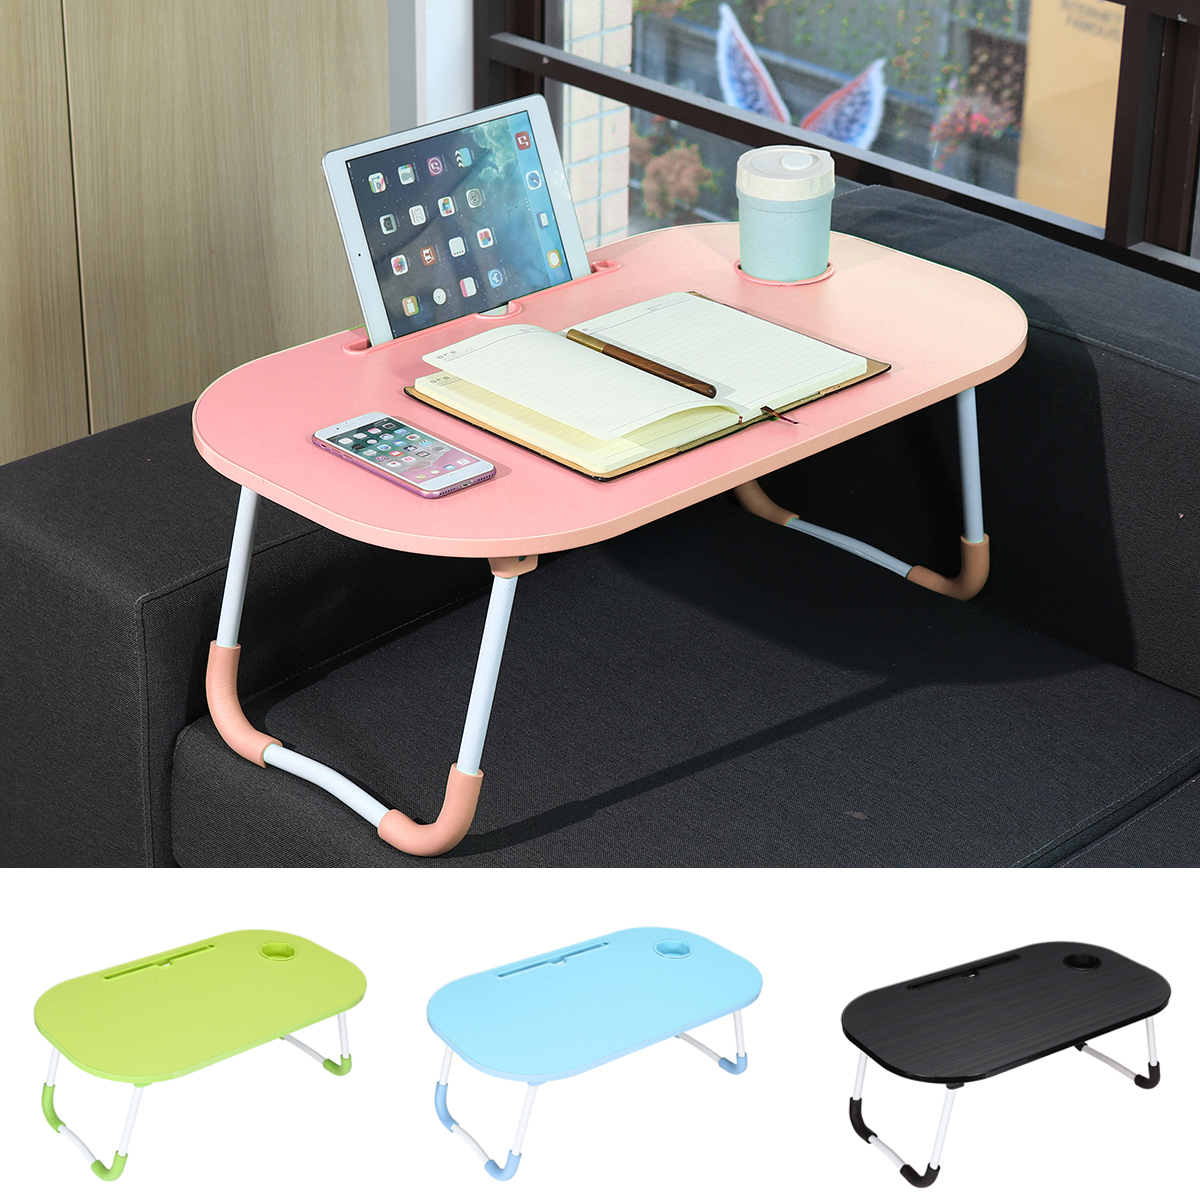 Bed-Desk-Lifting-Foldable-Laptop-Desk-Student-Study-Table-for-Home-Office-1762555-3